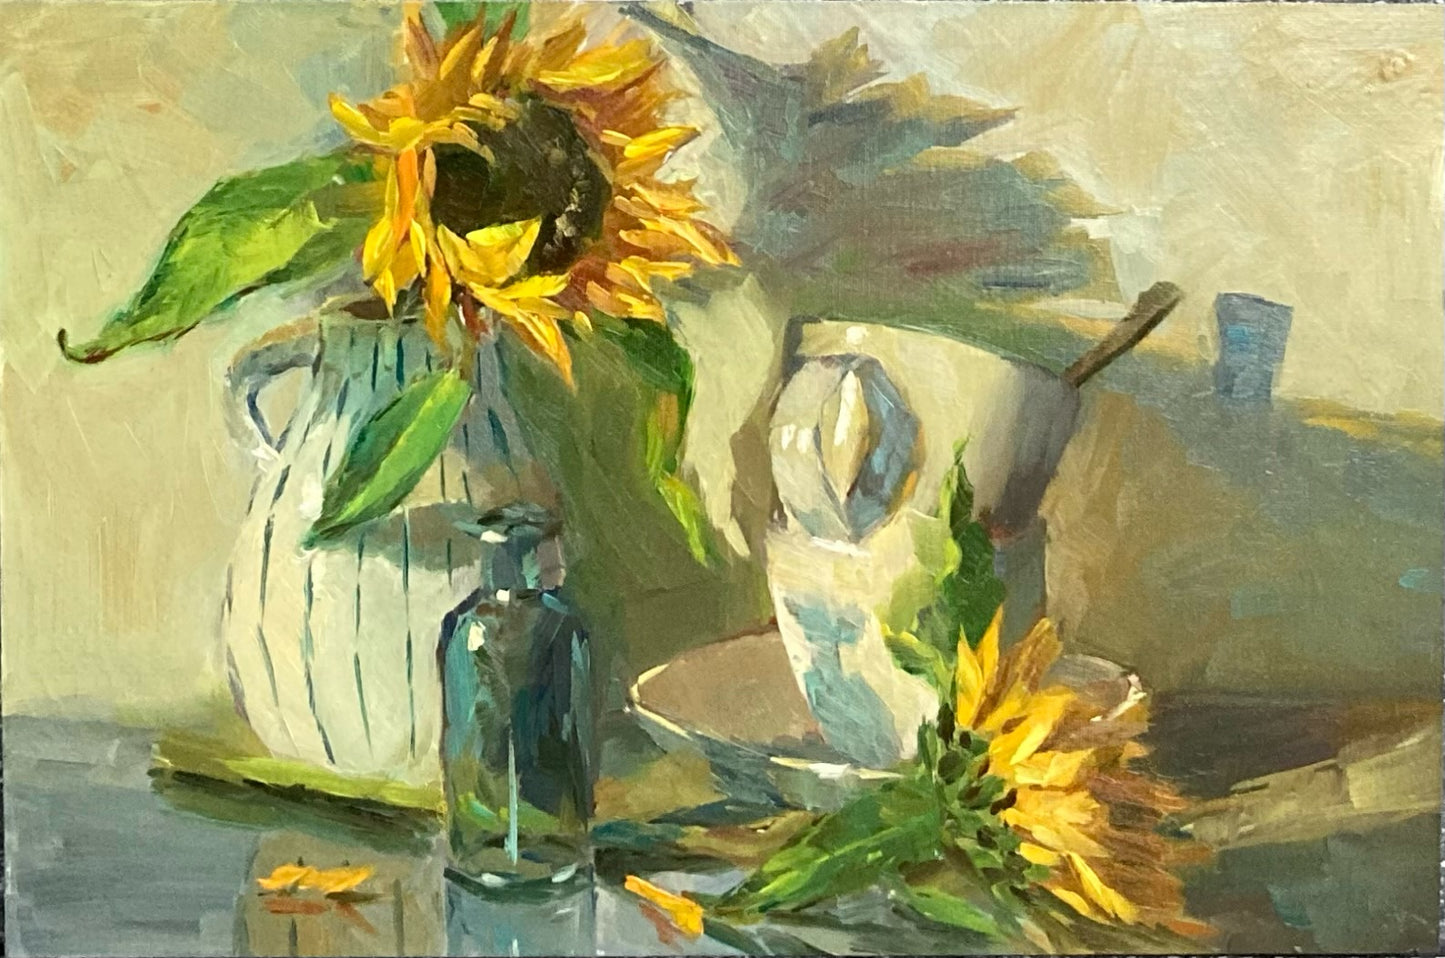 Sunflower Series 25 - Original Stilllife Painting, 12 by 8 inches